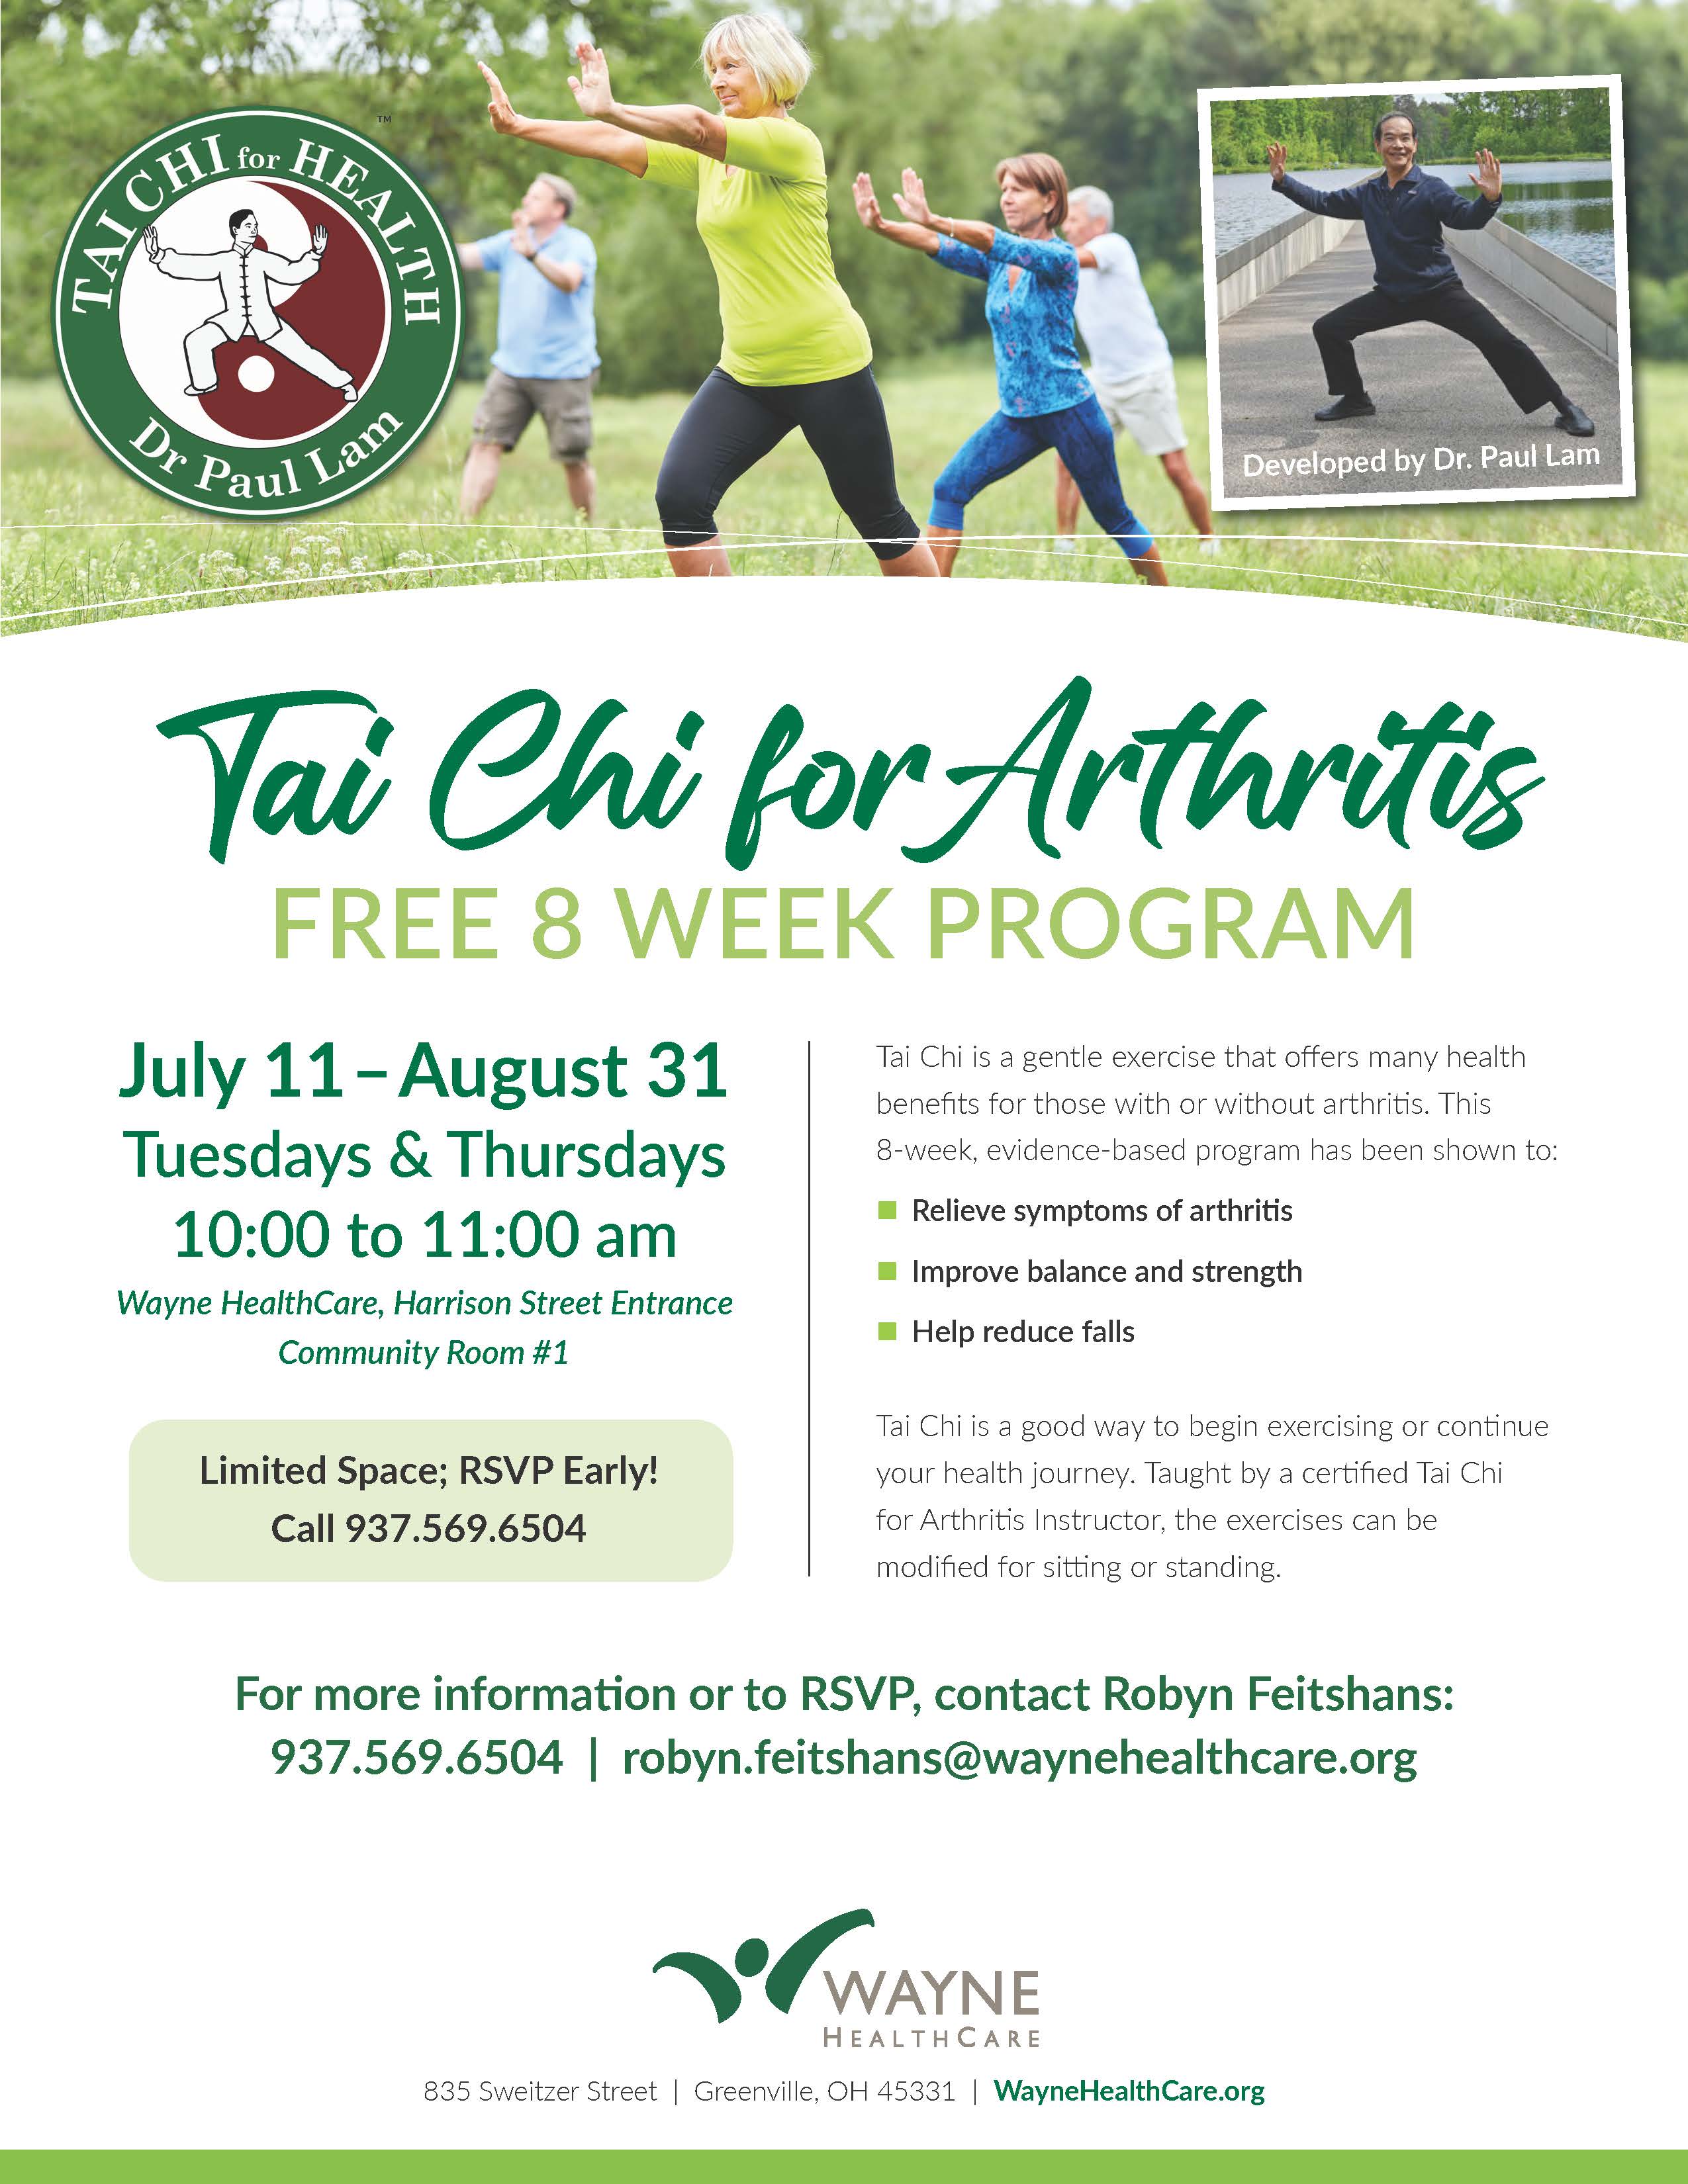 Peolpe doing tai chi in the park and information about tai chi program at Wayne HealthCare